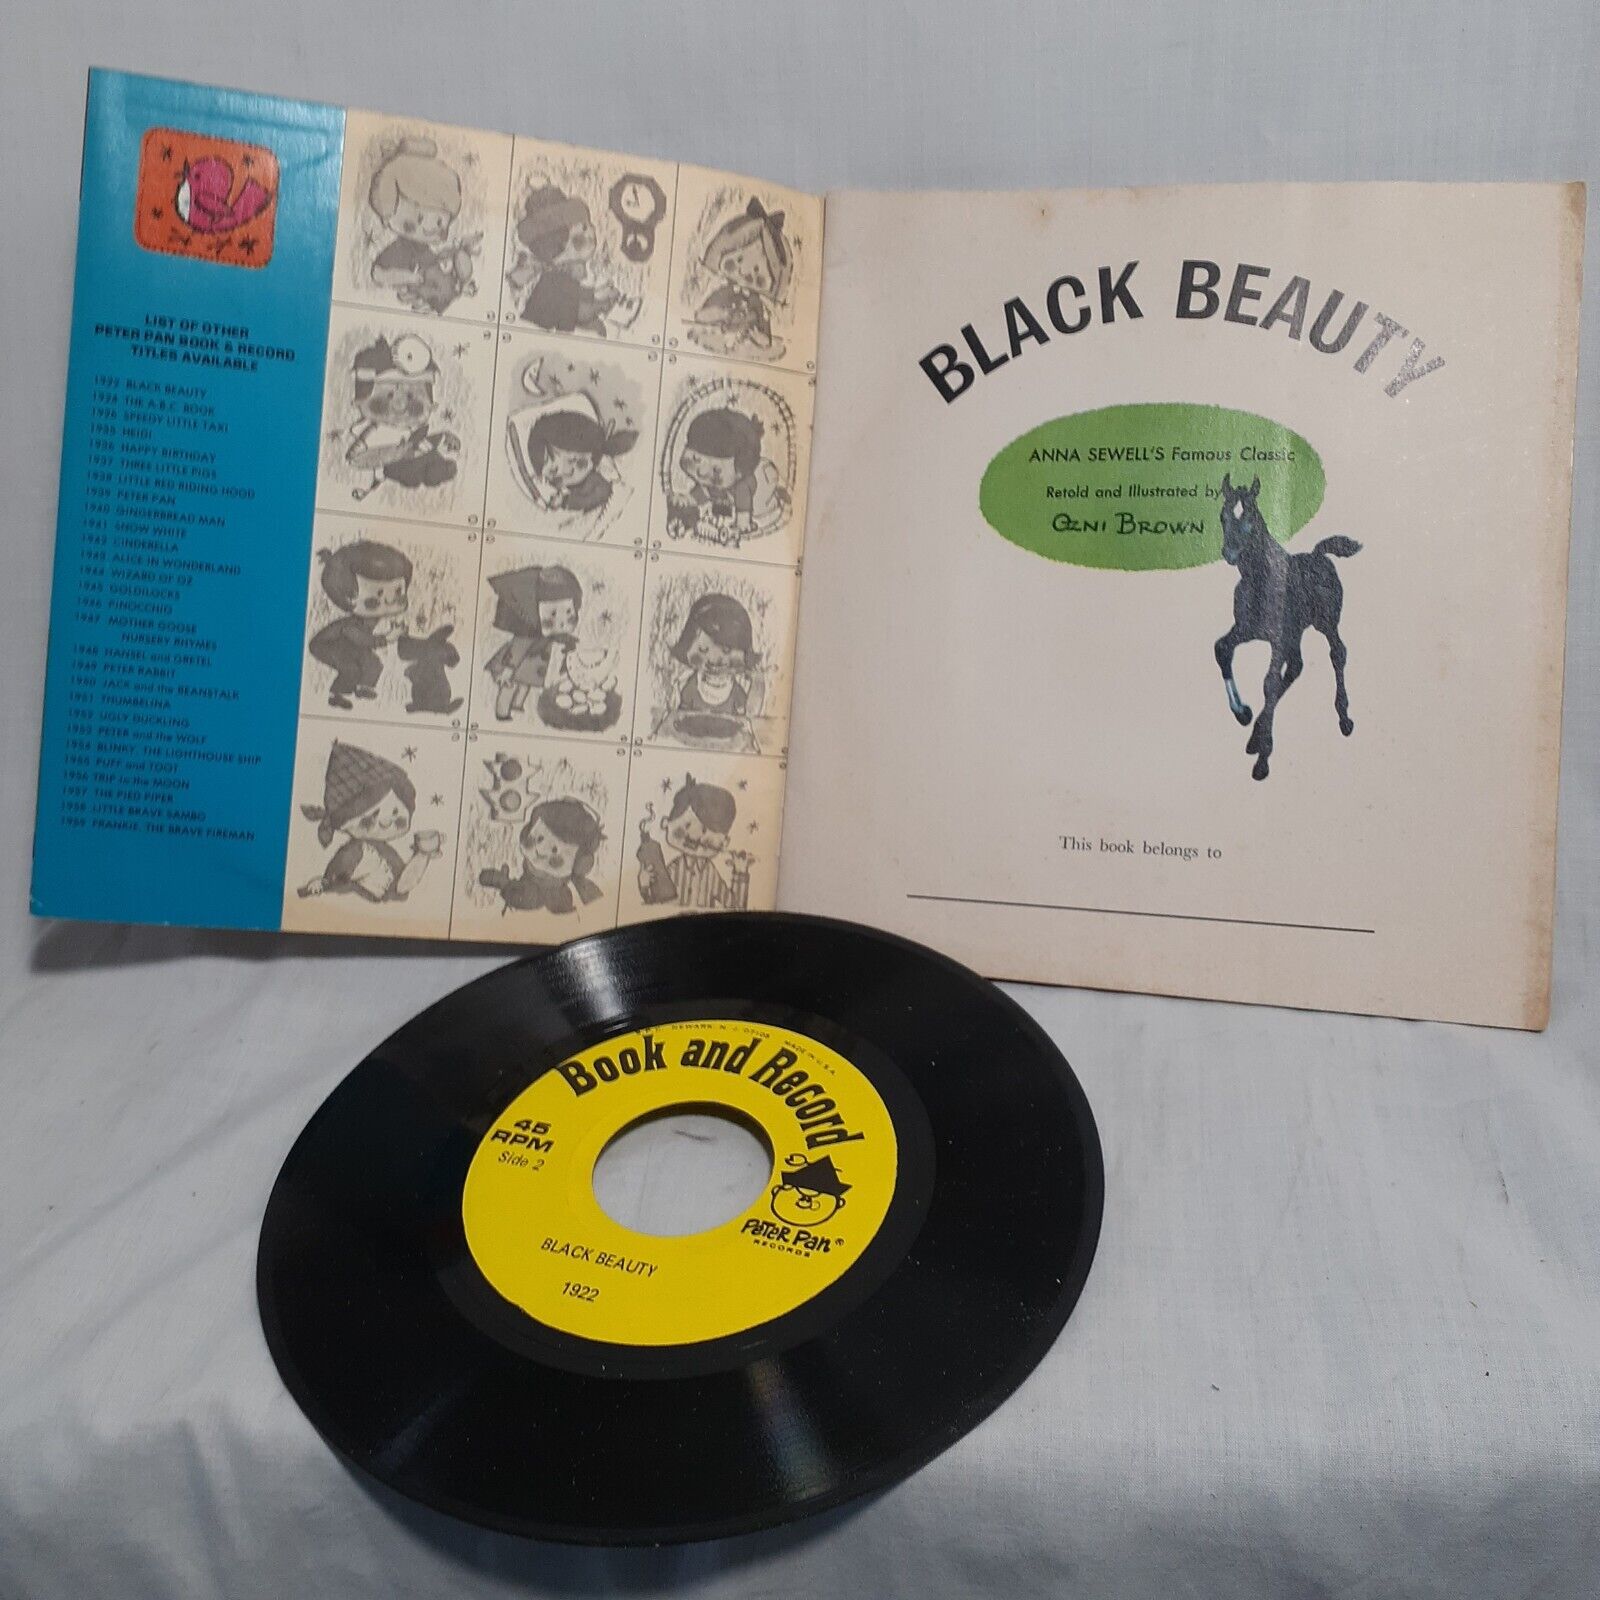 Vintage Black Beauty Book and Record # 1922 Peter Pan Records 45 RPM